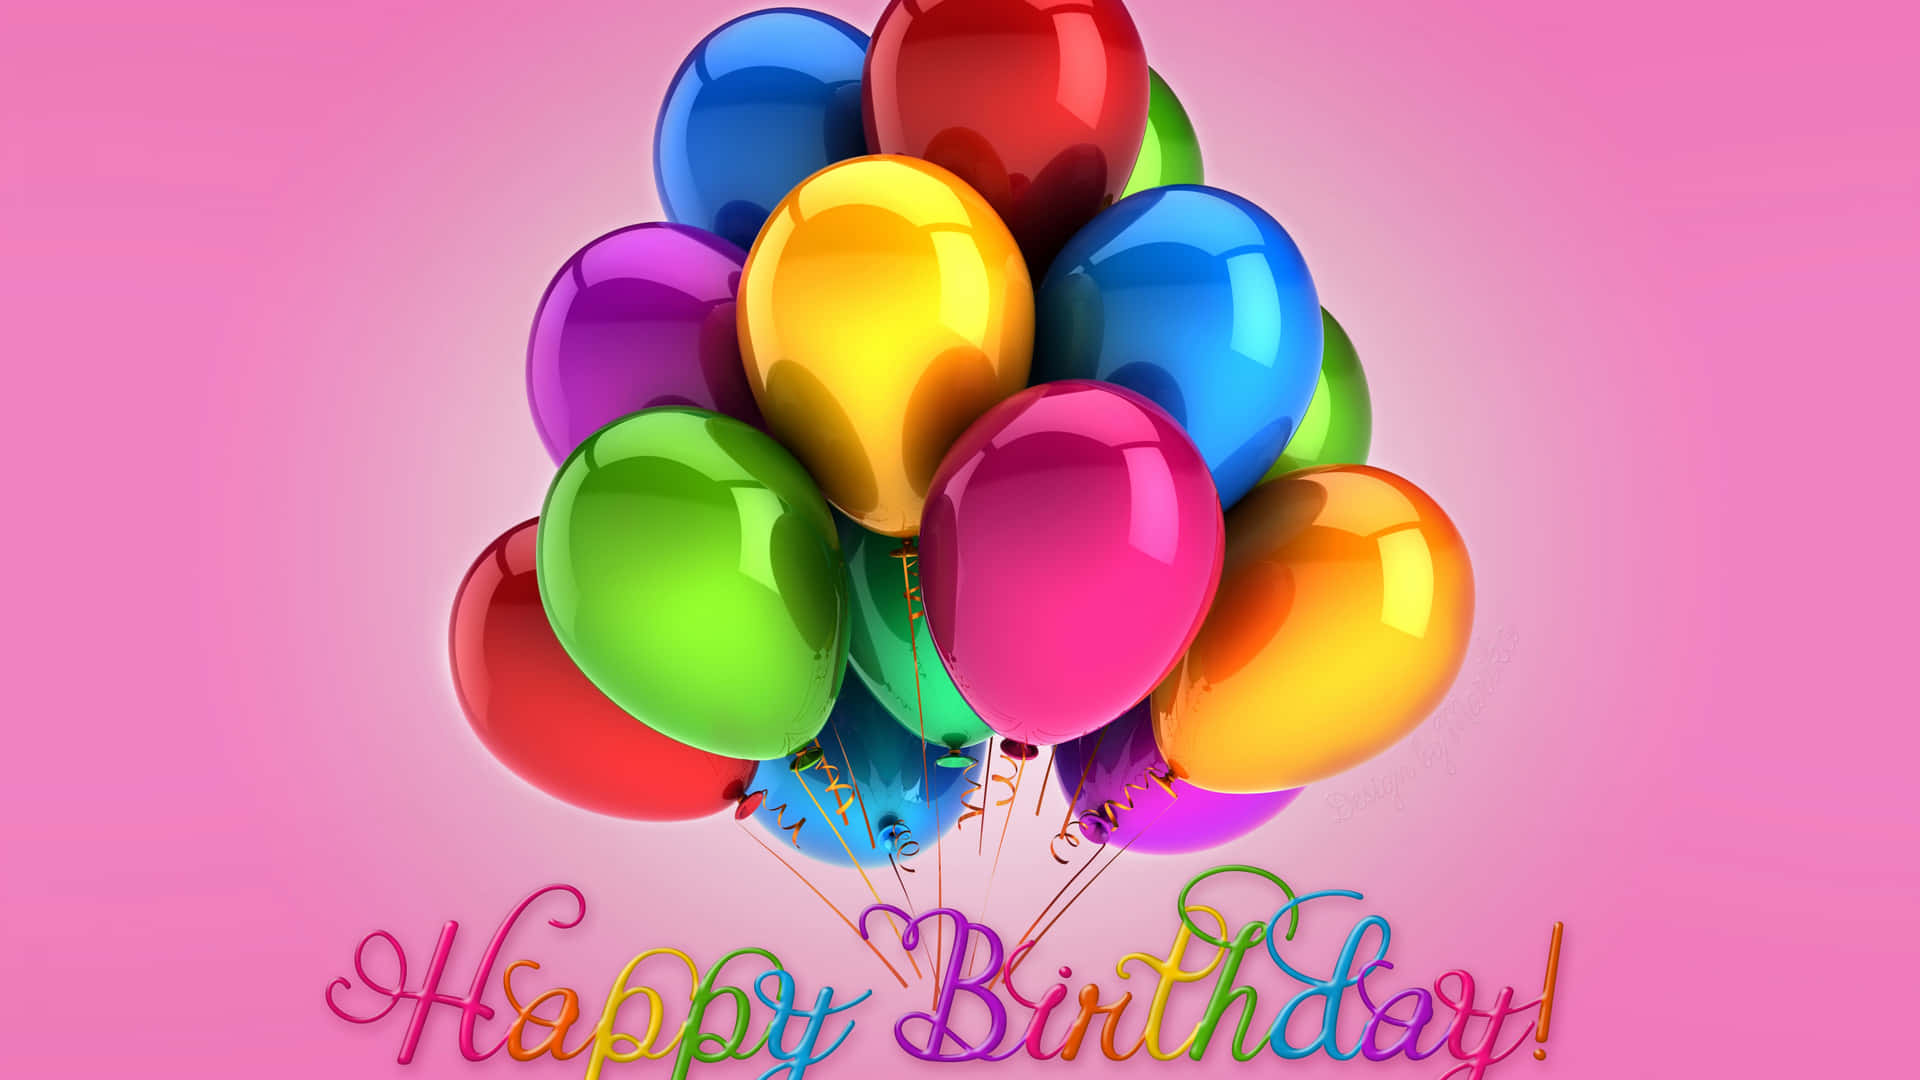 Colorful Pink Birthday Wallpaper